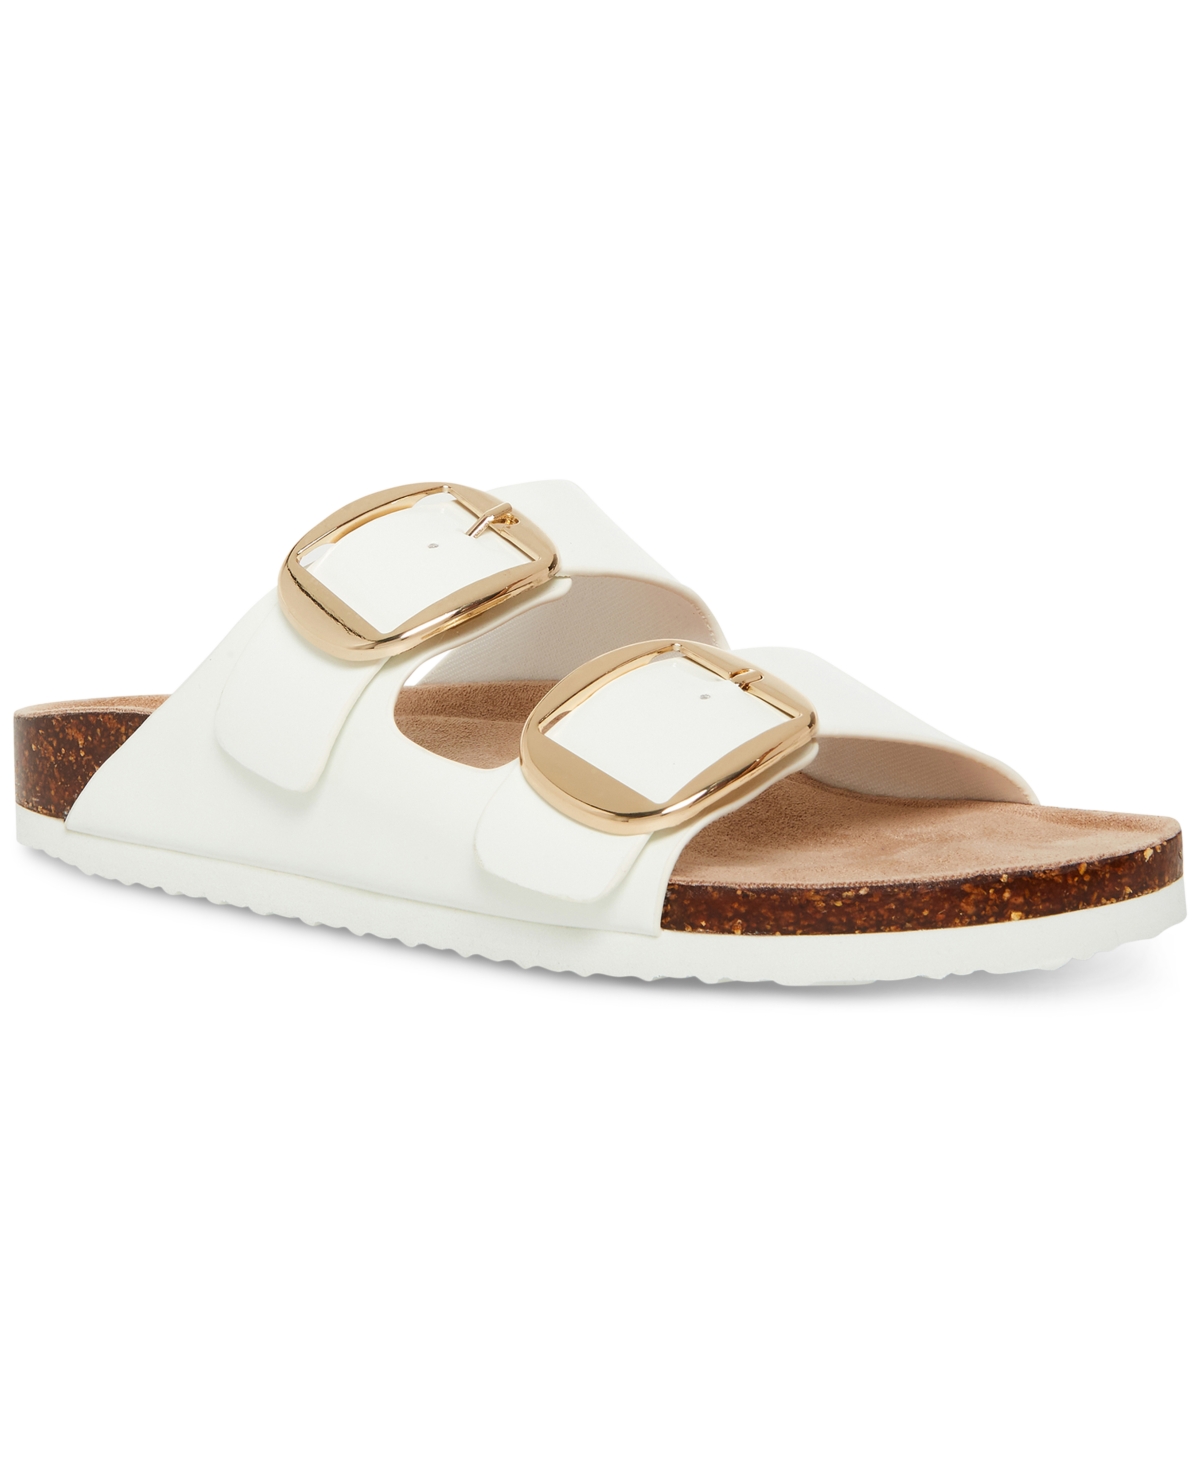 Shop Madden Girl Bodie Buckle Footbed Slide Sandals In White Box Patent